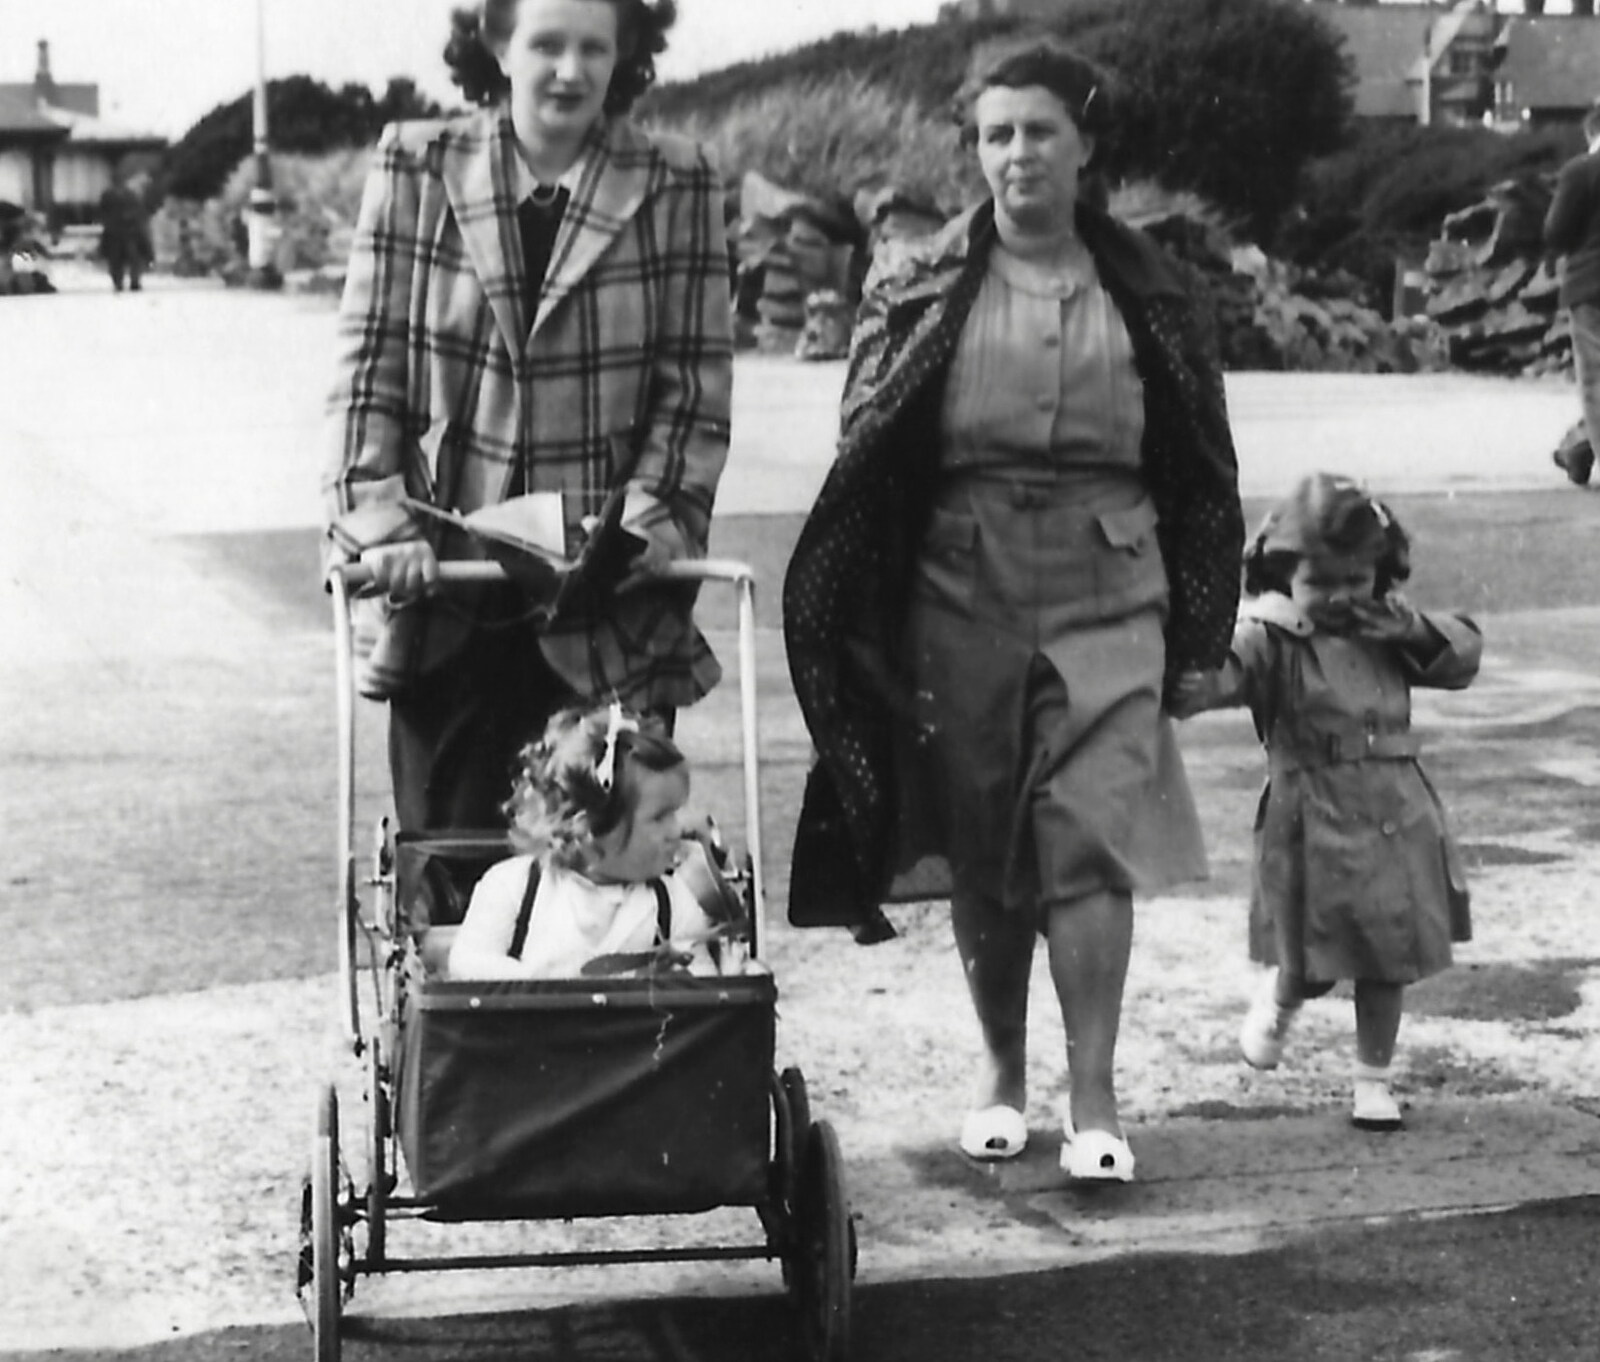 Margaret and Elsie stride about in Southport from Family History: The 1940s and 1950s - 24th January 2020